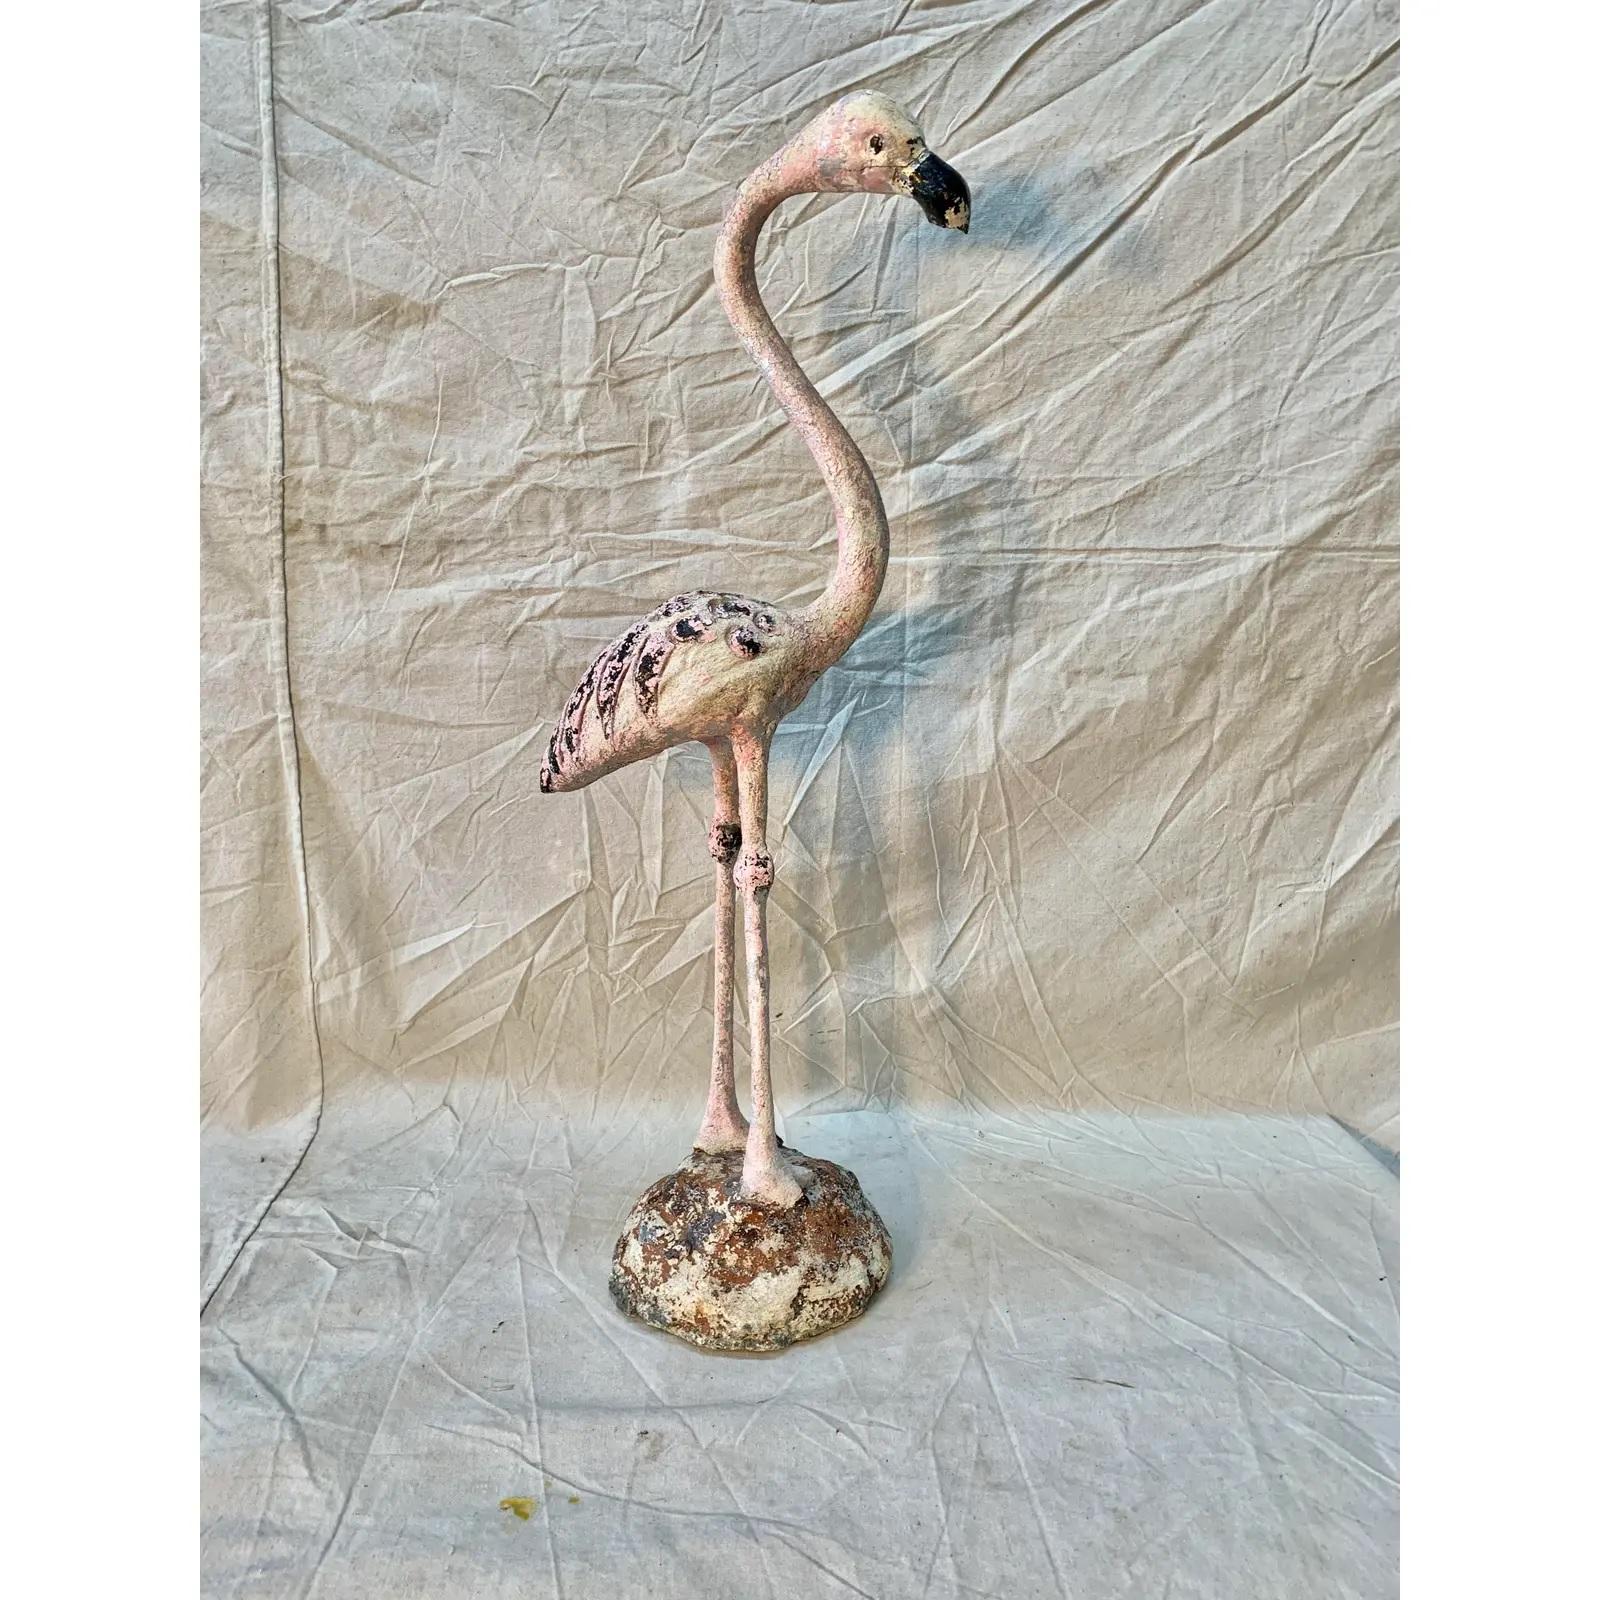 Found in the South of France, this Mid-Century Modern French Flamingo Garden Ornament is crafted entirely of cast stone concrete over an iron armature. The weathered and old, likely original, pink and black painted surface on this flamingo is